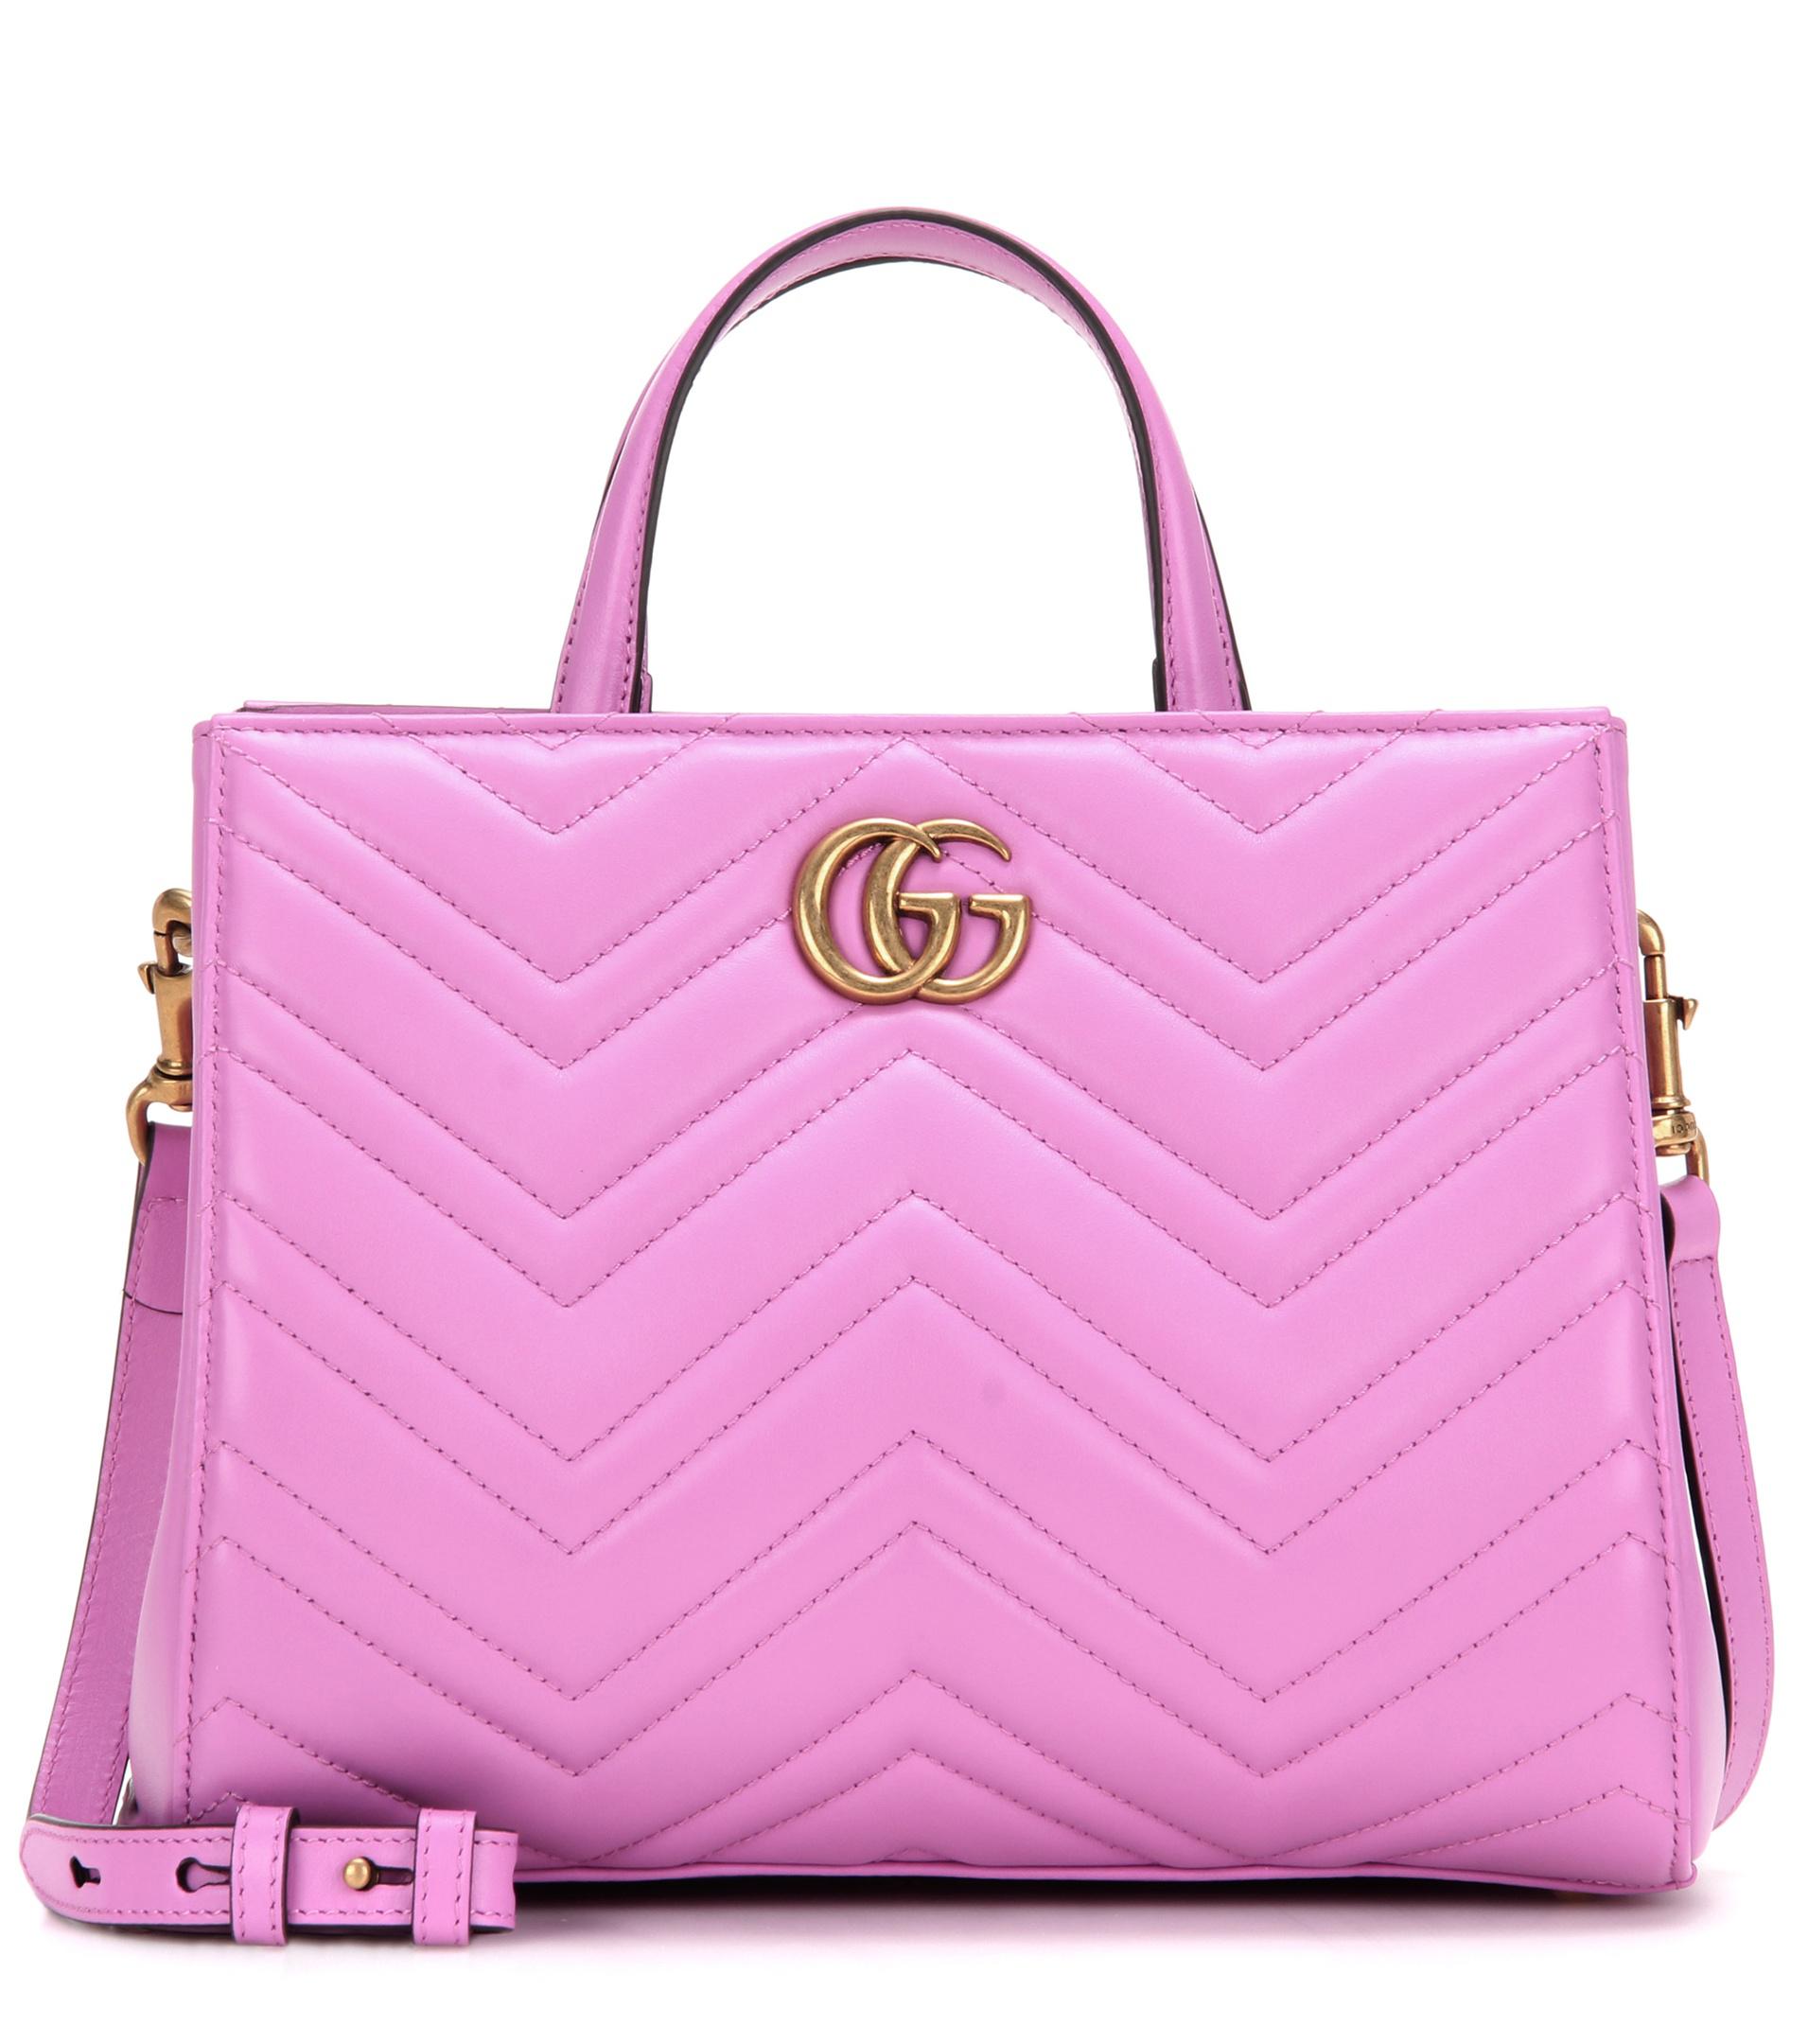 Gucci Marmont Bag Sale Uk | Confederated Tribes of the Umatilla Indian Reservation